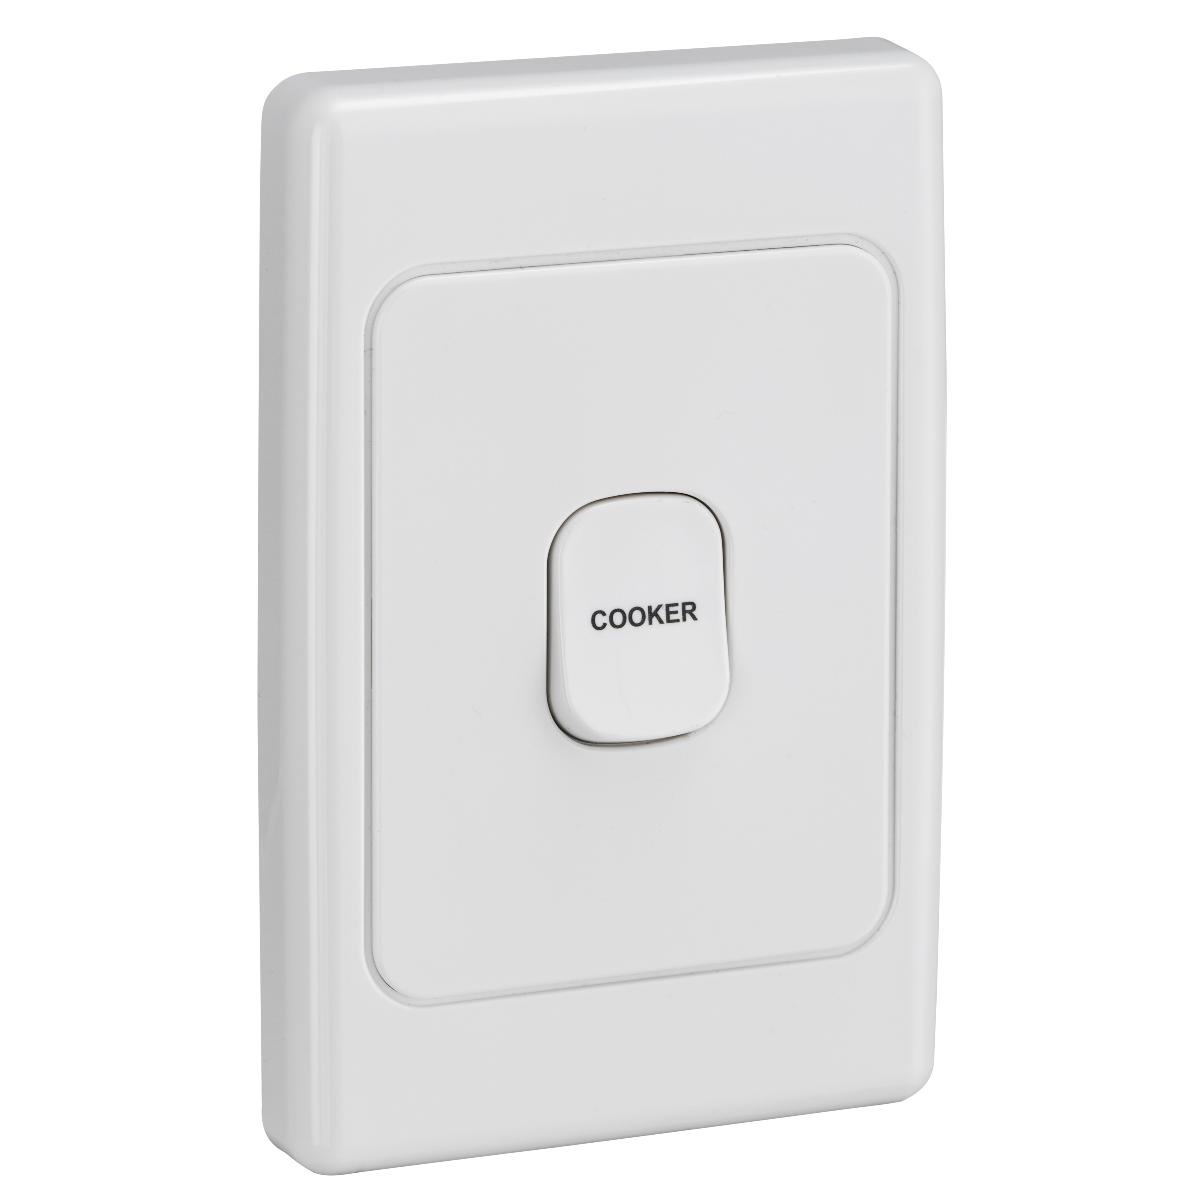 2000 COOKER SWITCH VERT 45A S/P WHITE